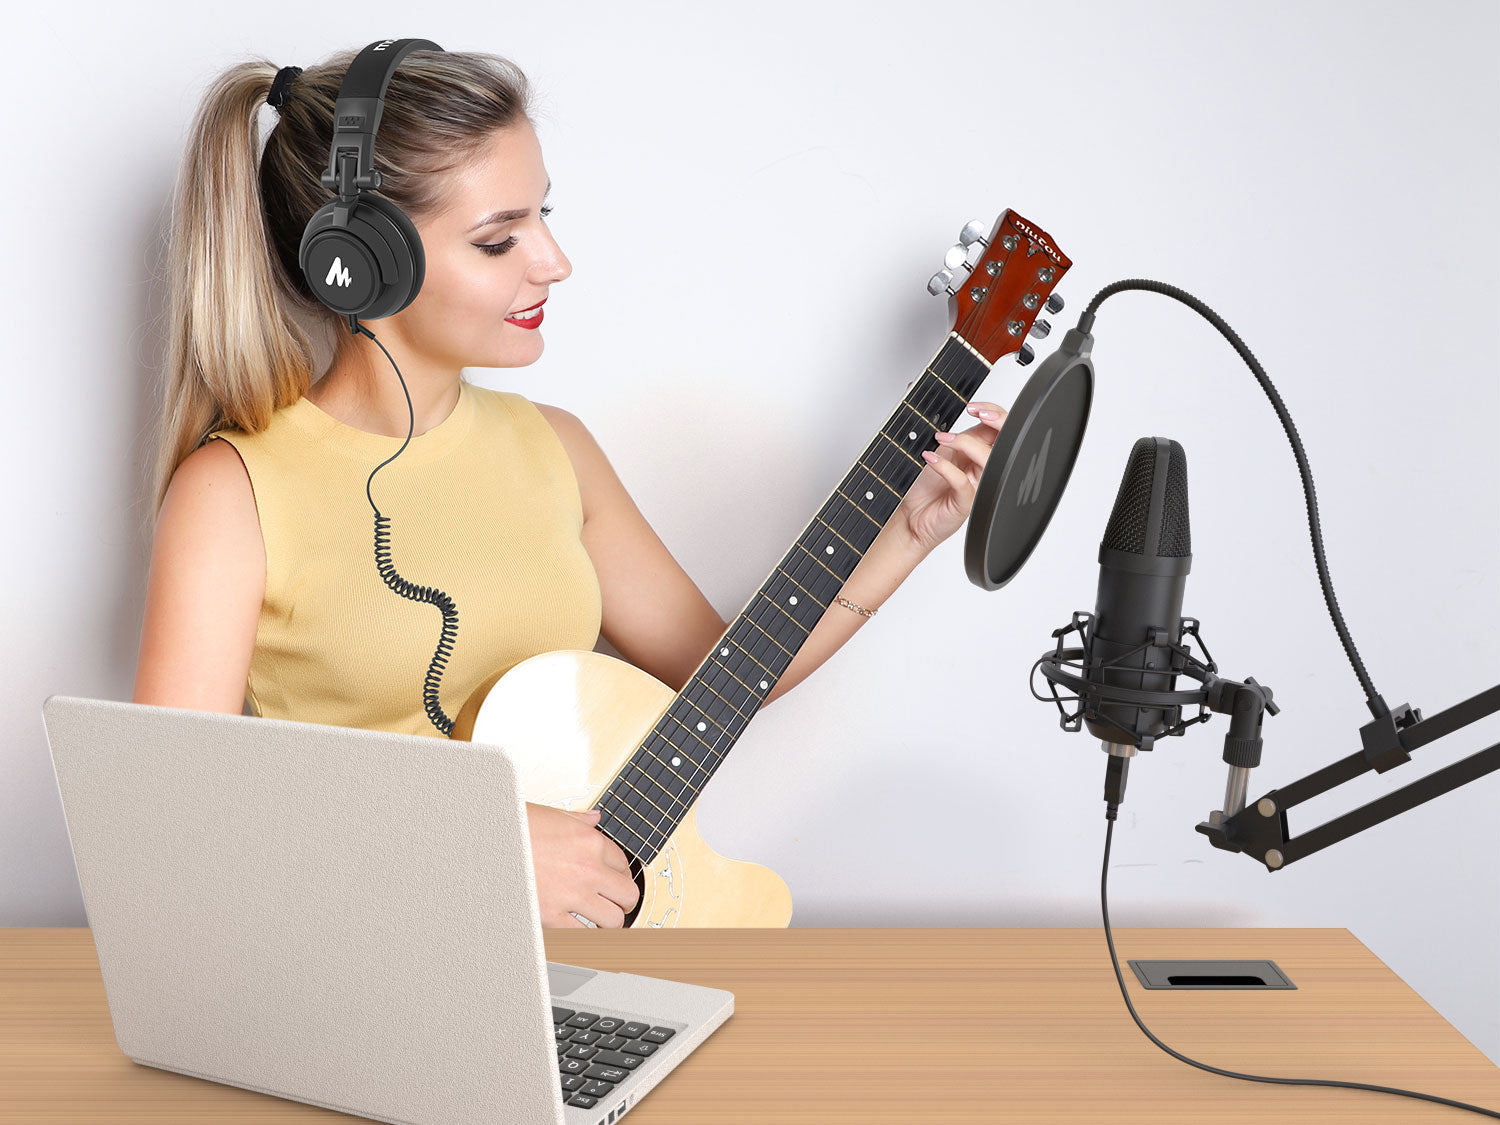 How to Build a Home Studio for Professional-Quality Podcasting?